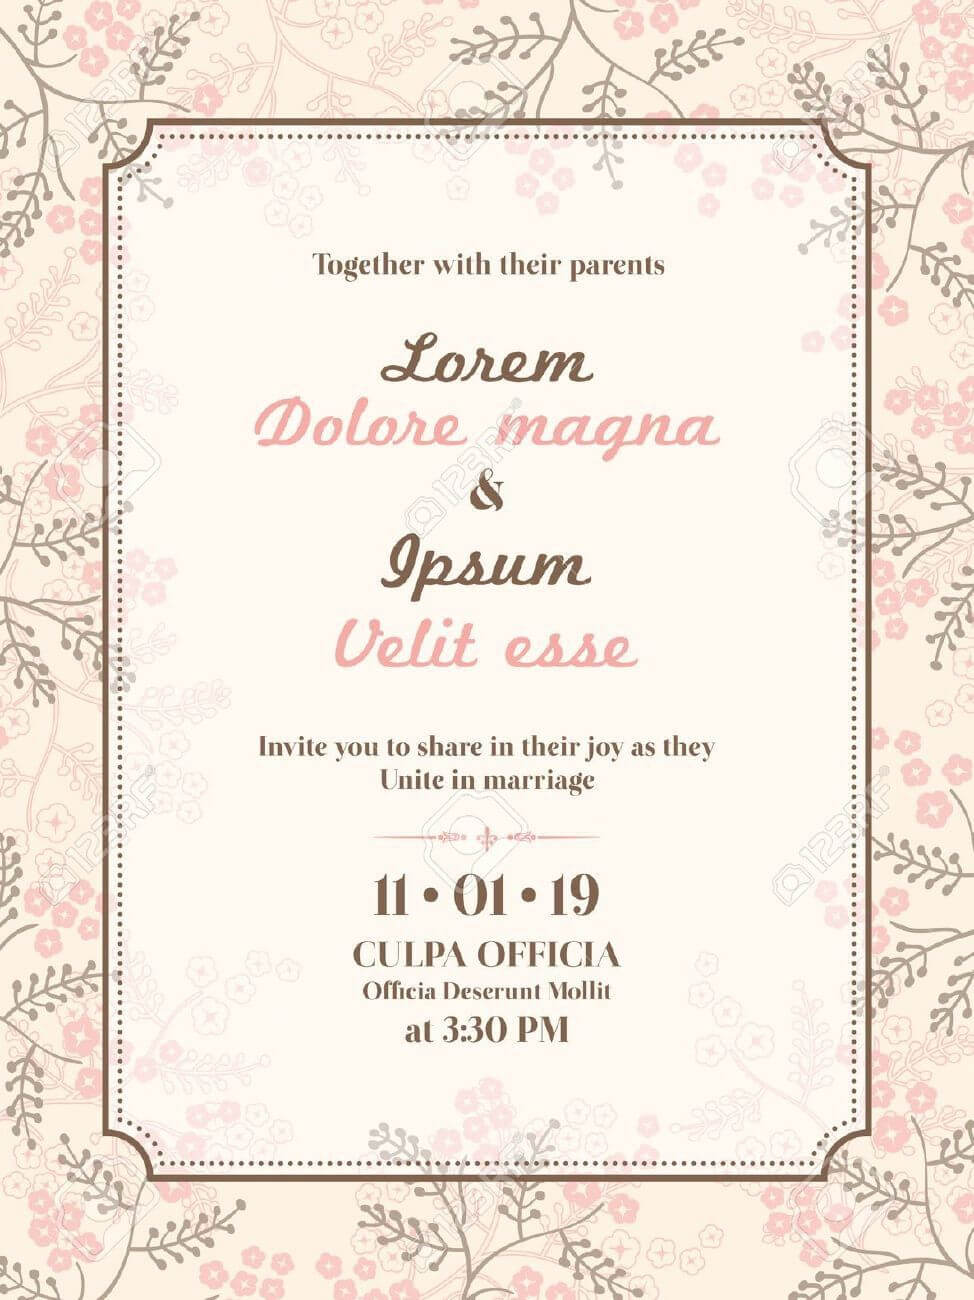 Wedding Invitation Cards Samples | Marriage Invitation Card In Sample Wedding Invitation Cards Templates